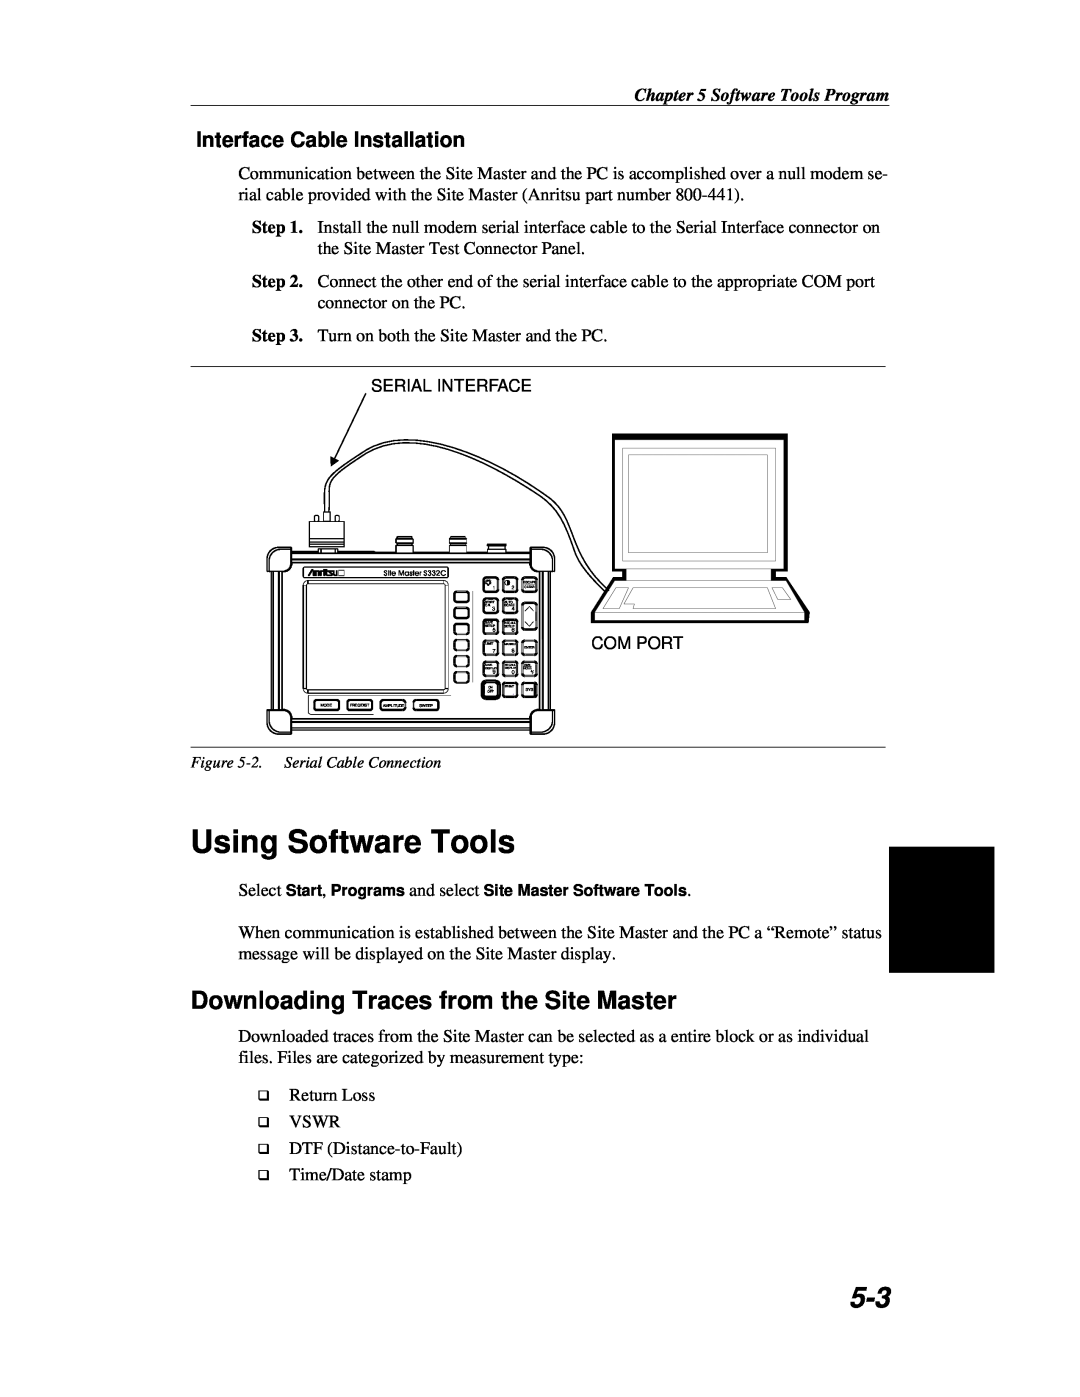 Anritsu S251C manual Using Software Tools, Downloading Traces from the Site Master, Interface Cable Installation 